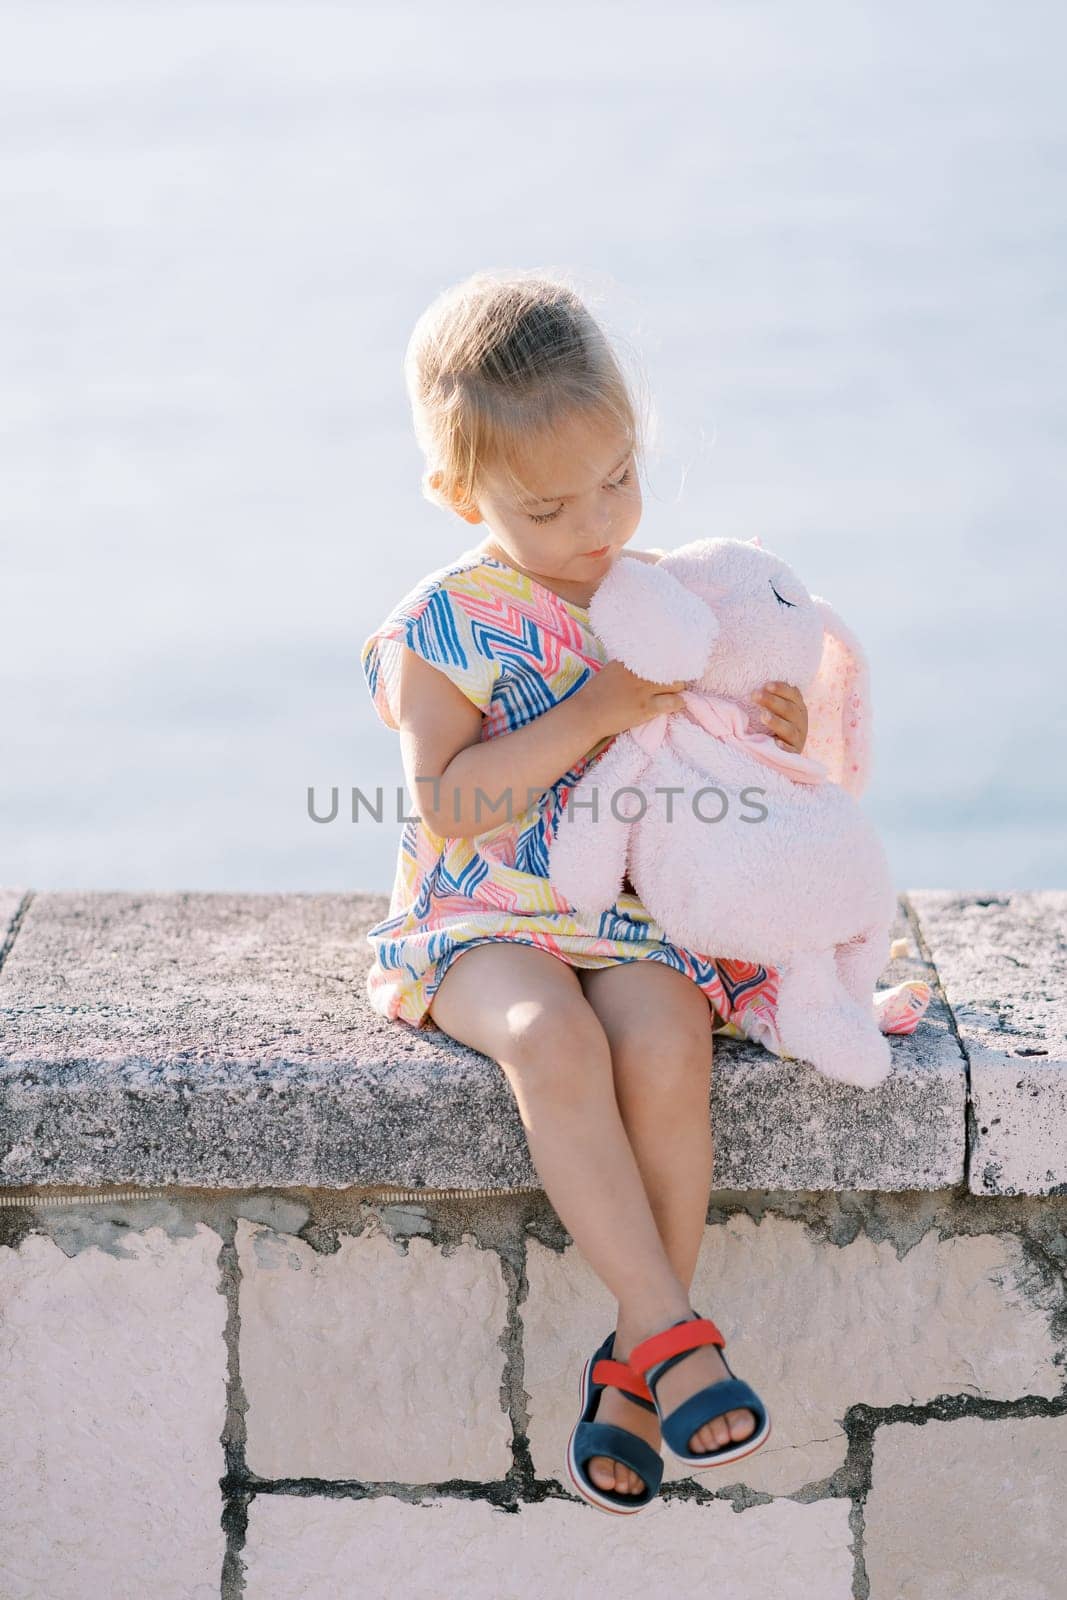 Little girl examines a plush rabbit in her hands while sitting on a fence by the sea. High quality photo